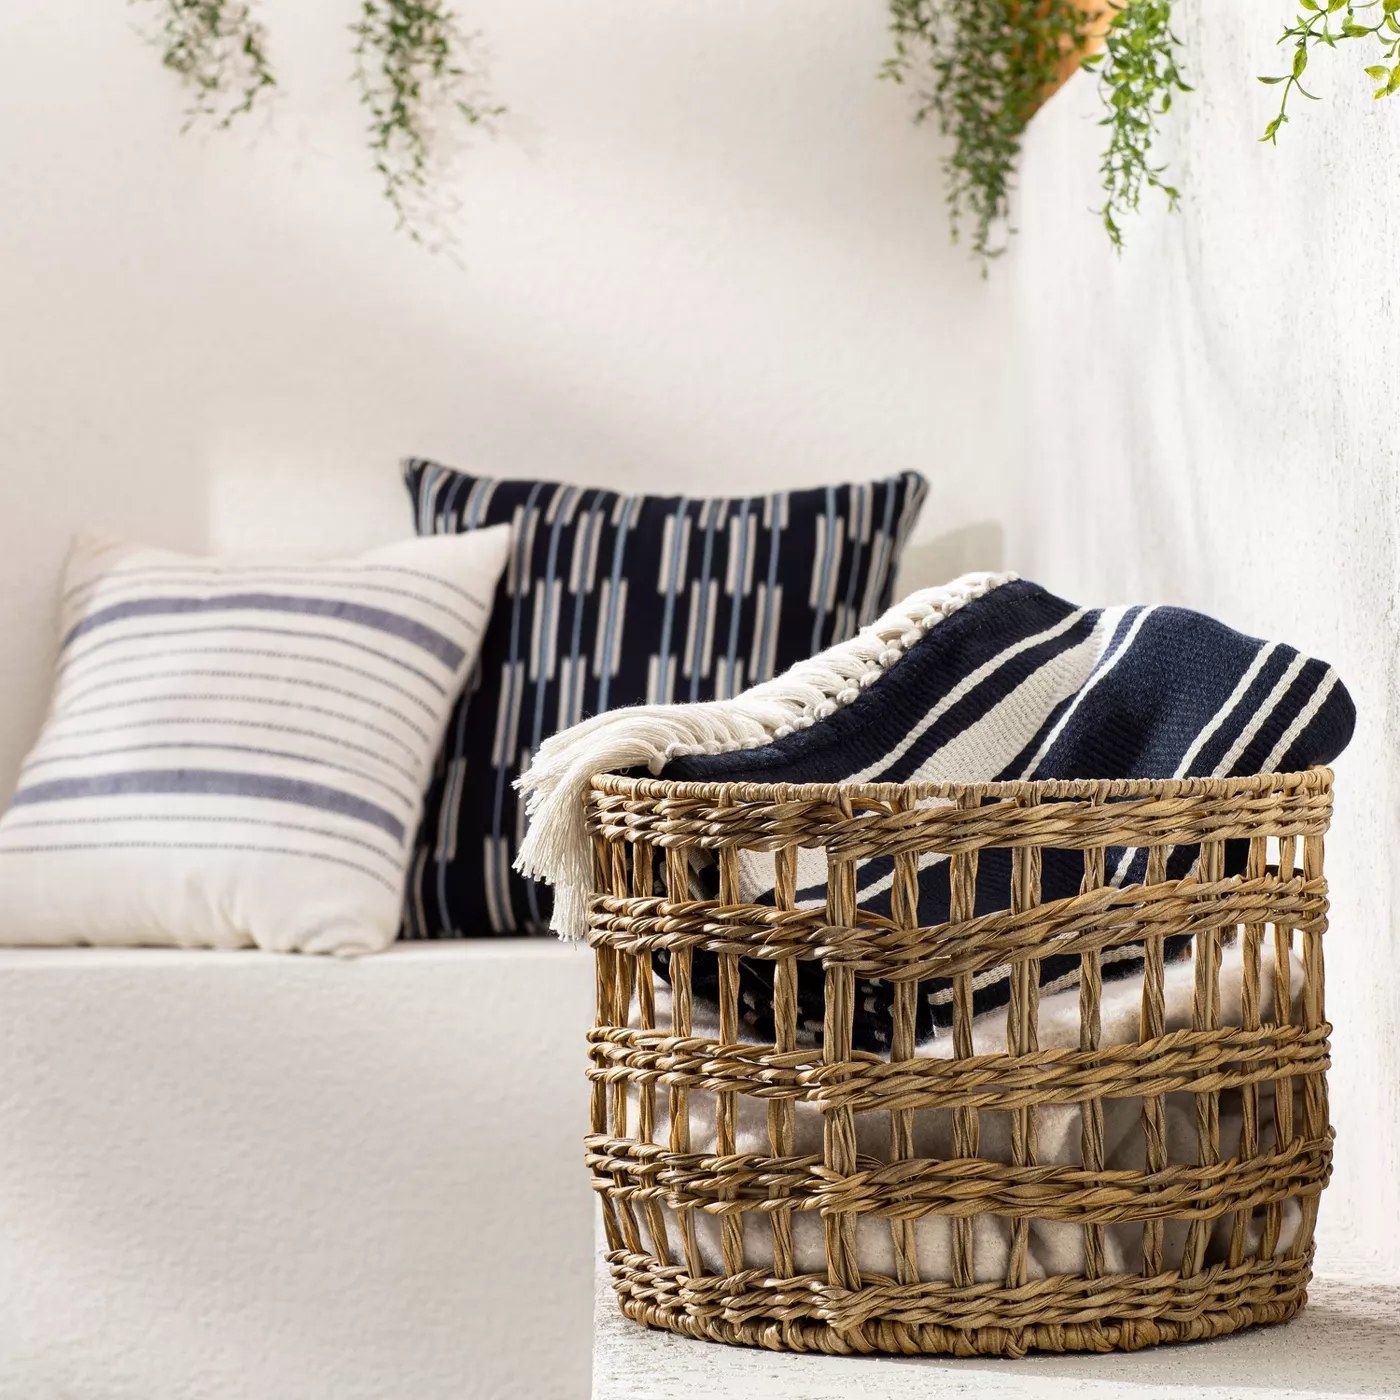 The rattan storage basket outside holding blankets